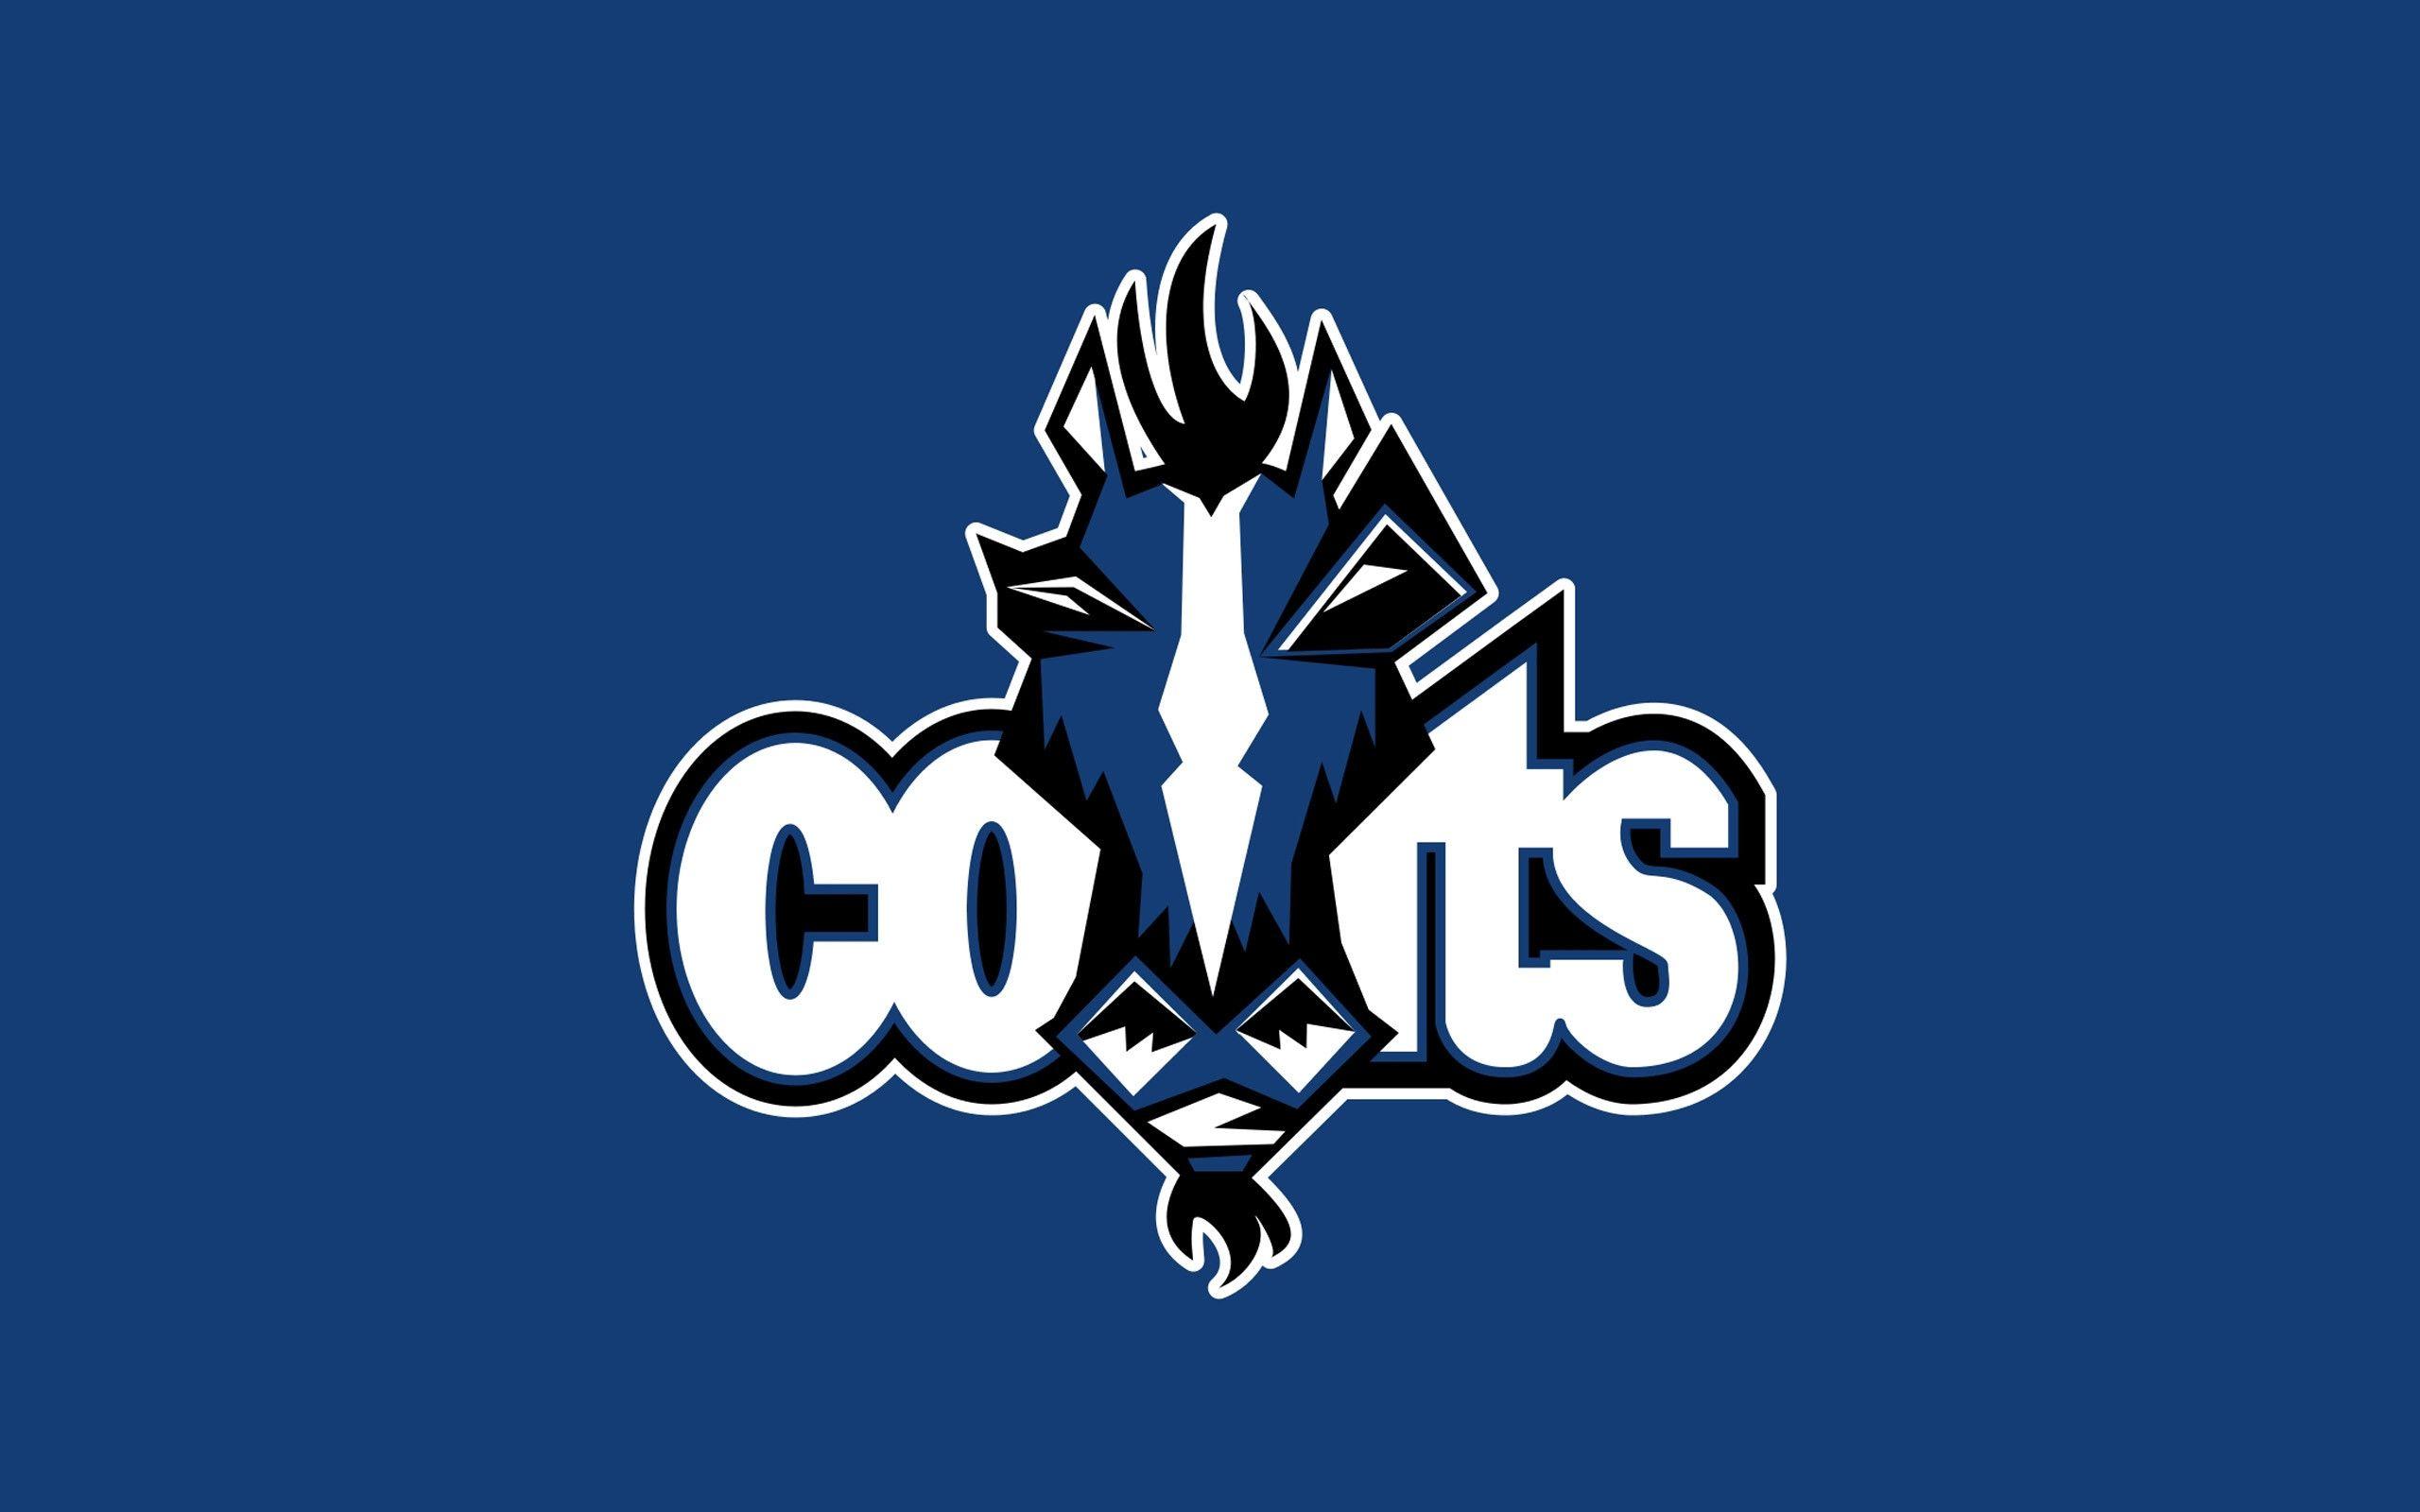 Indianapolis Colts wallpaper background. Indianapolis Colts